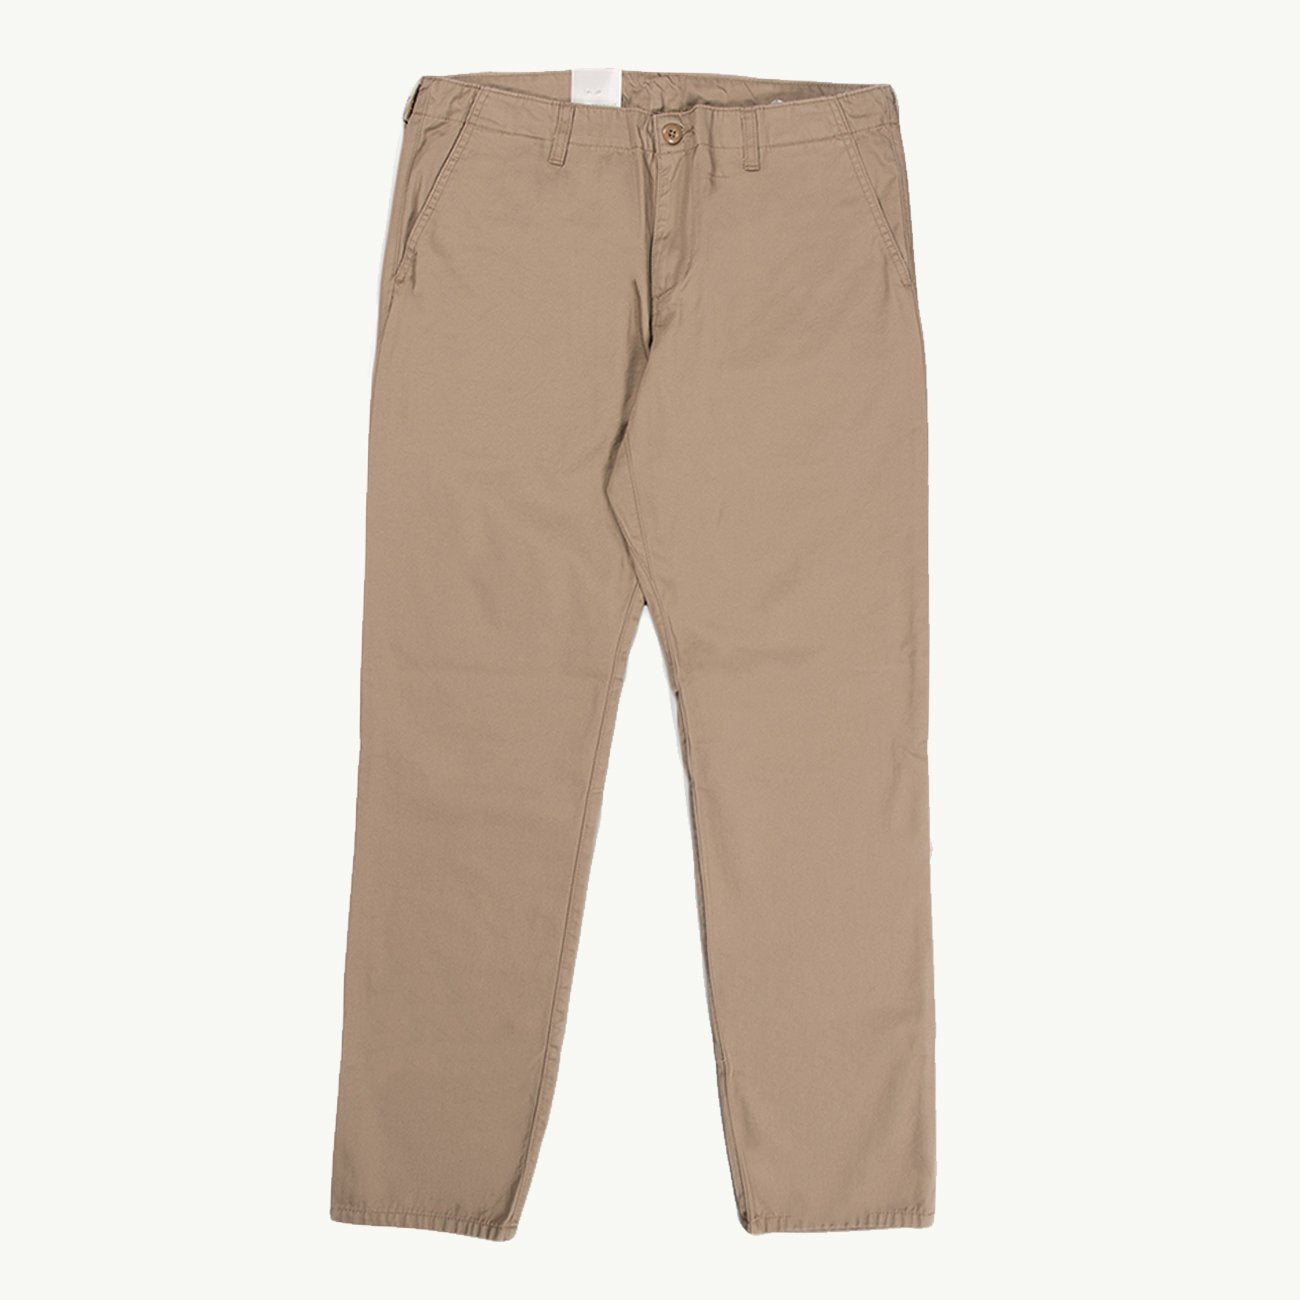 CARHARTT CLUB PANT QUESTA LEATHER RINSED